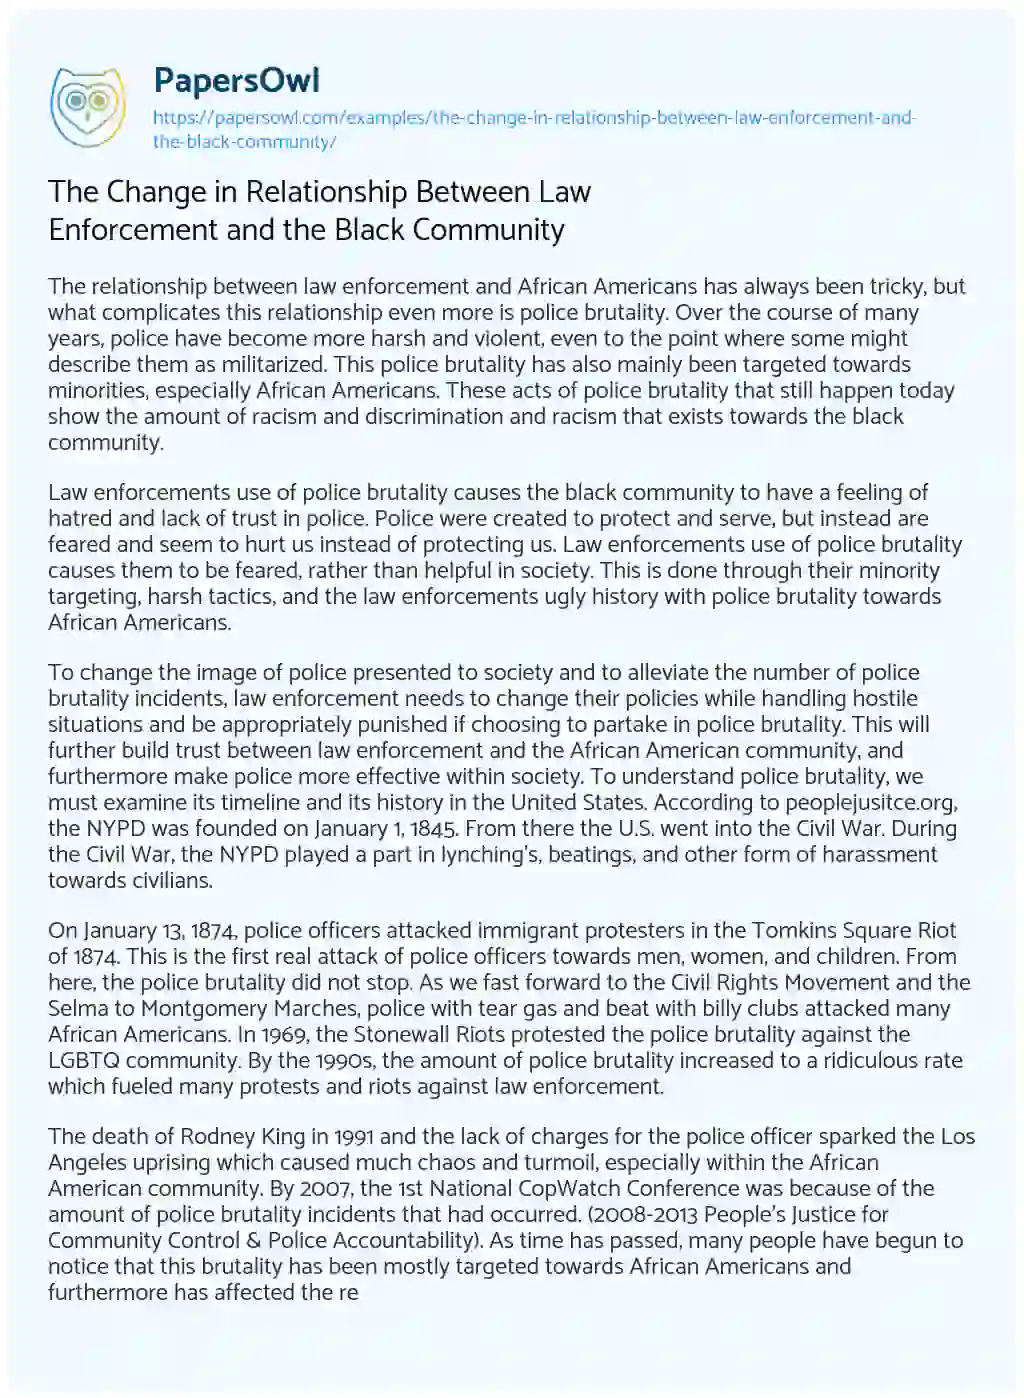 Essay on The Change in Relationship between Law Enforcement and the Black Community